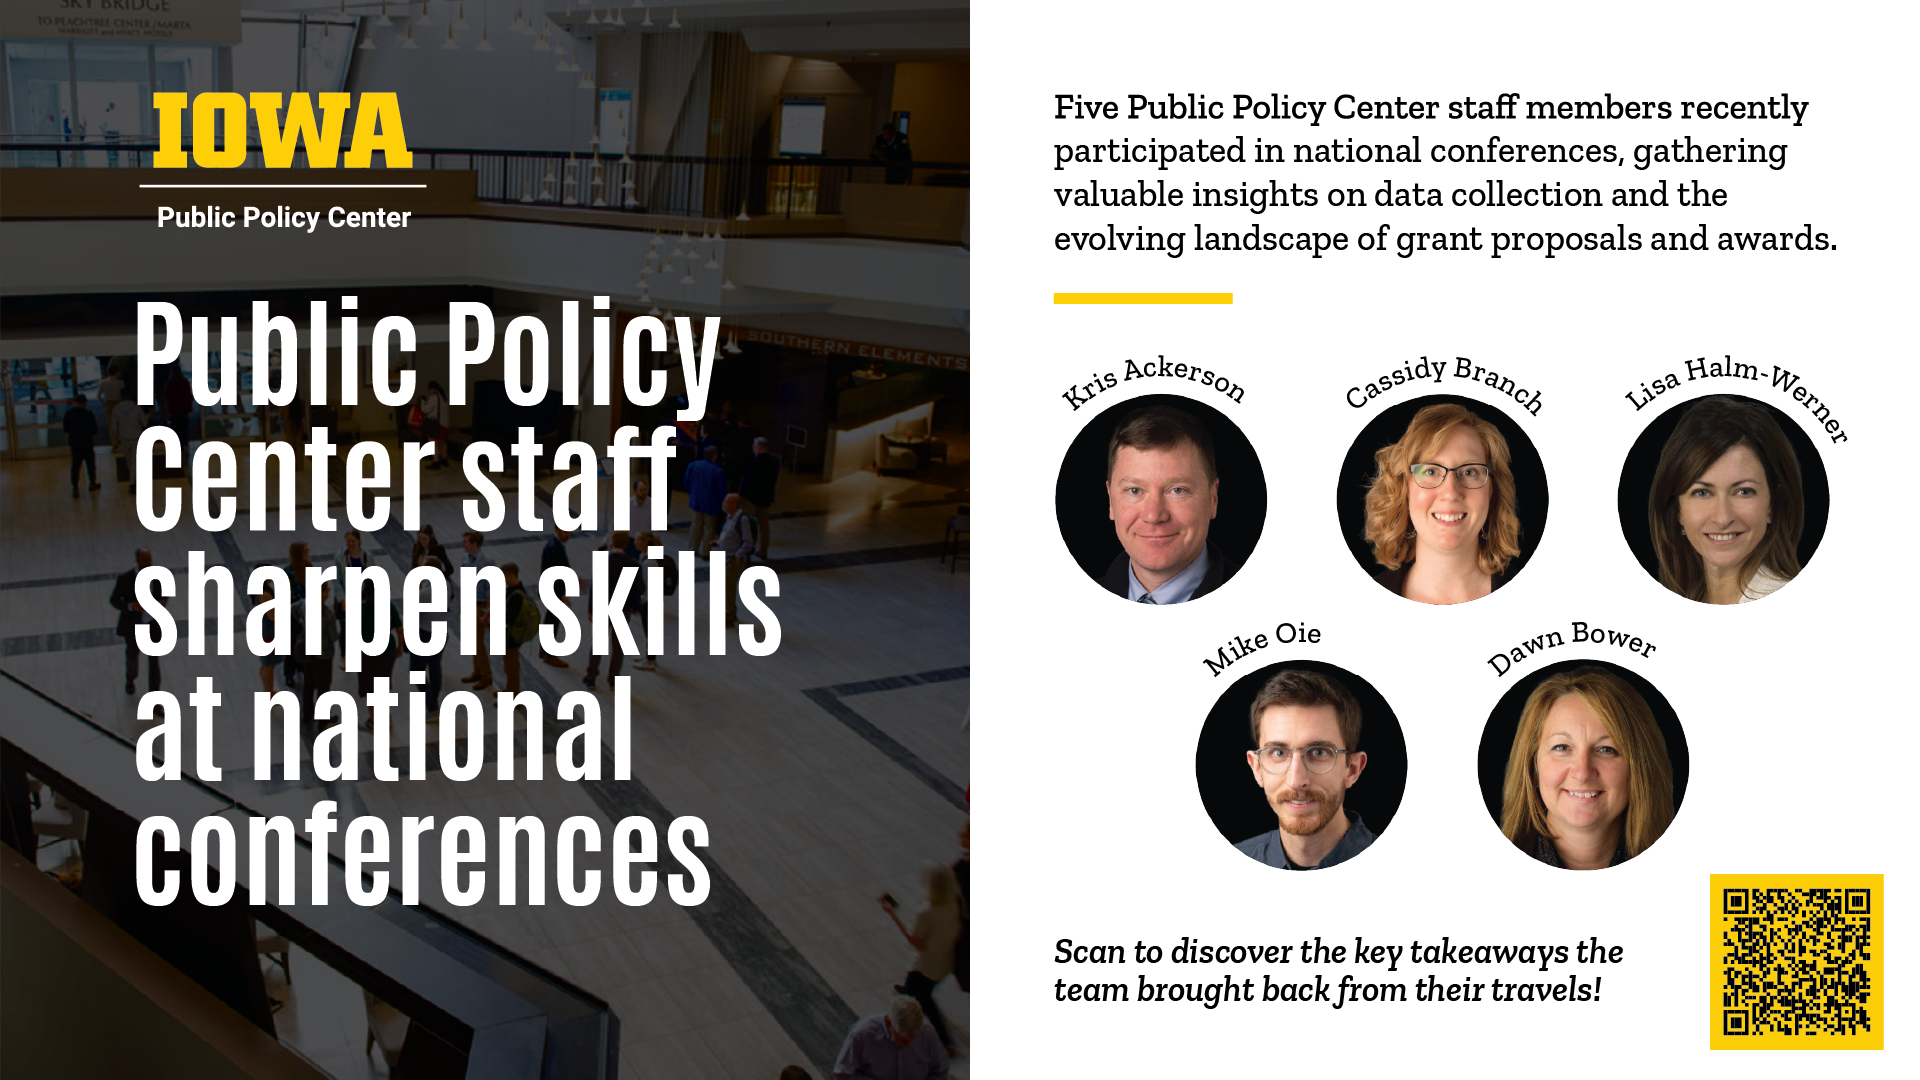 Headshots of Kris Ackerson, Cassidy Branch, Lisa Halm-Werner, Mike Oie, and Dawn Bower are organized next to text that reads "Public Policy Center staff sharpen skills at national conferences."